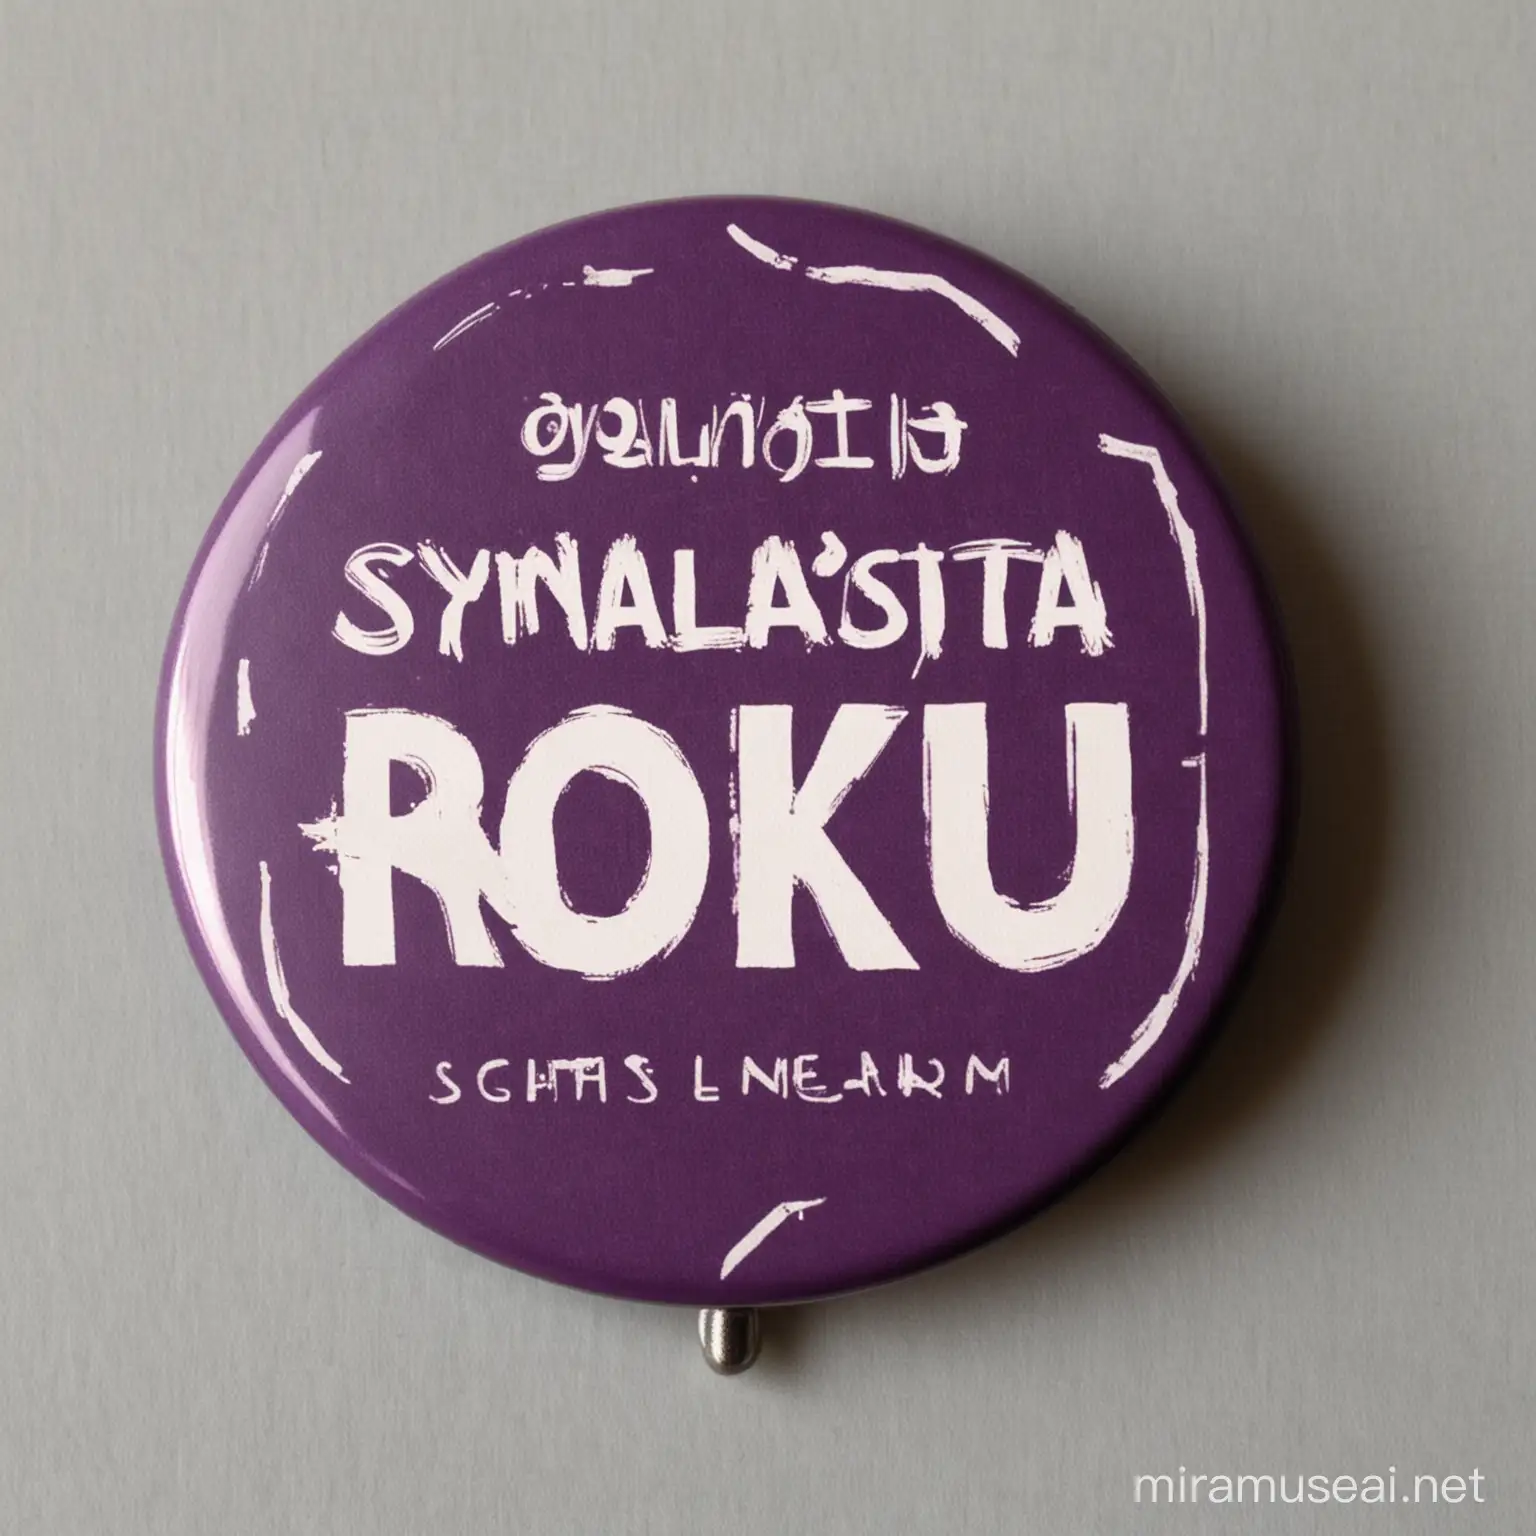 Picture of badge with text: "Sygnalista roku"
